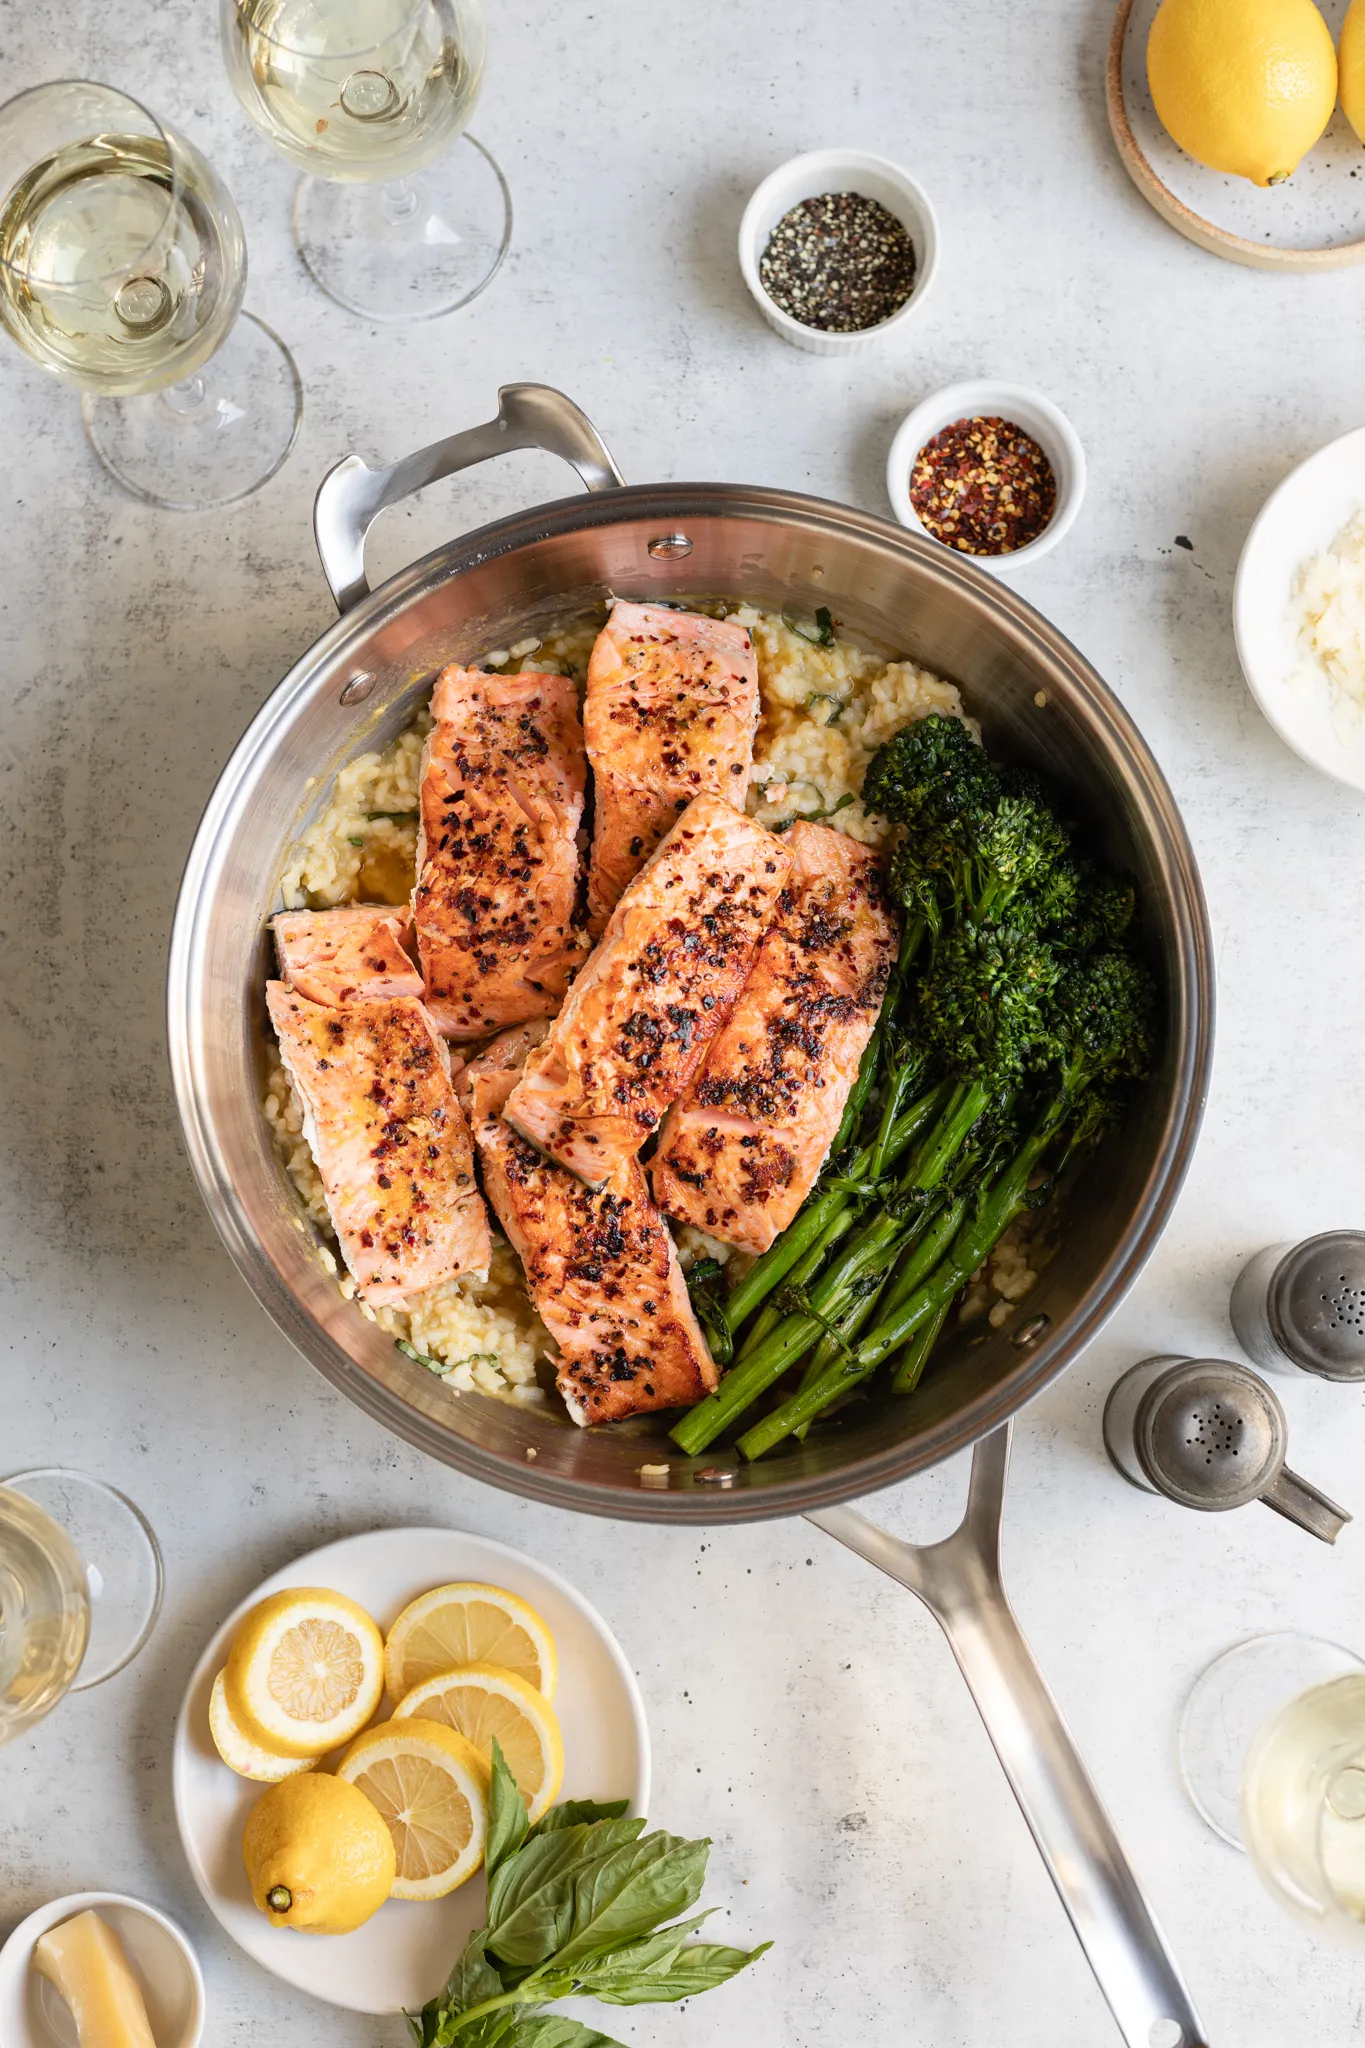 Seared Salmon with Shallot and Gruyere Risotto